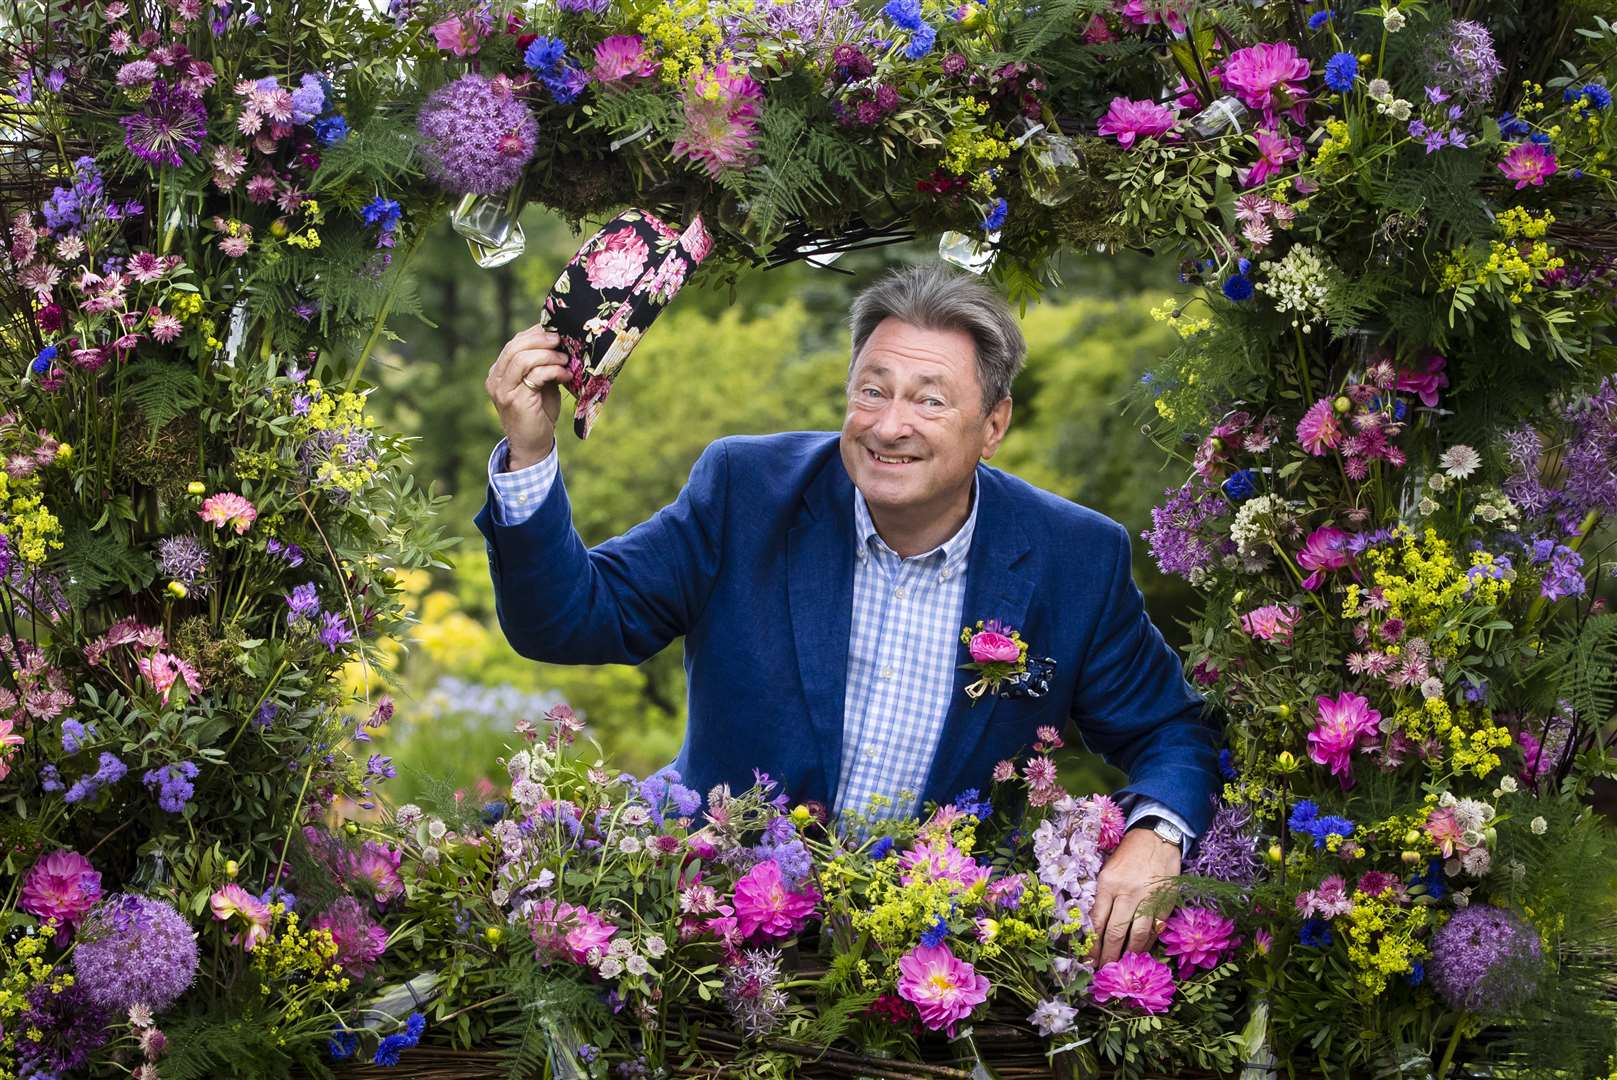 Alan Titchmarsh has spoken of the power of gardens (Danny Lawson/PA)